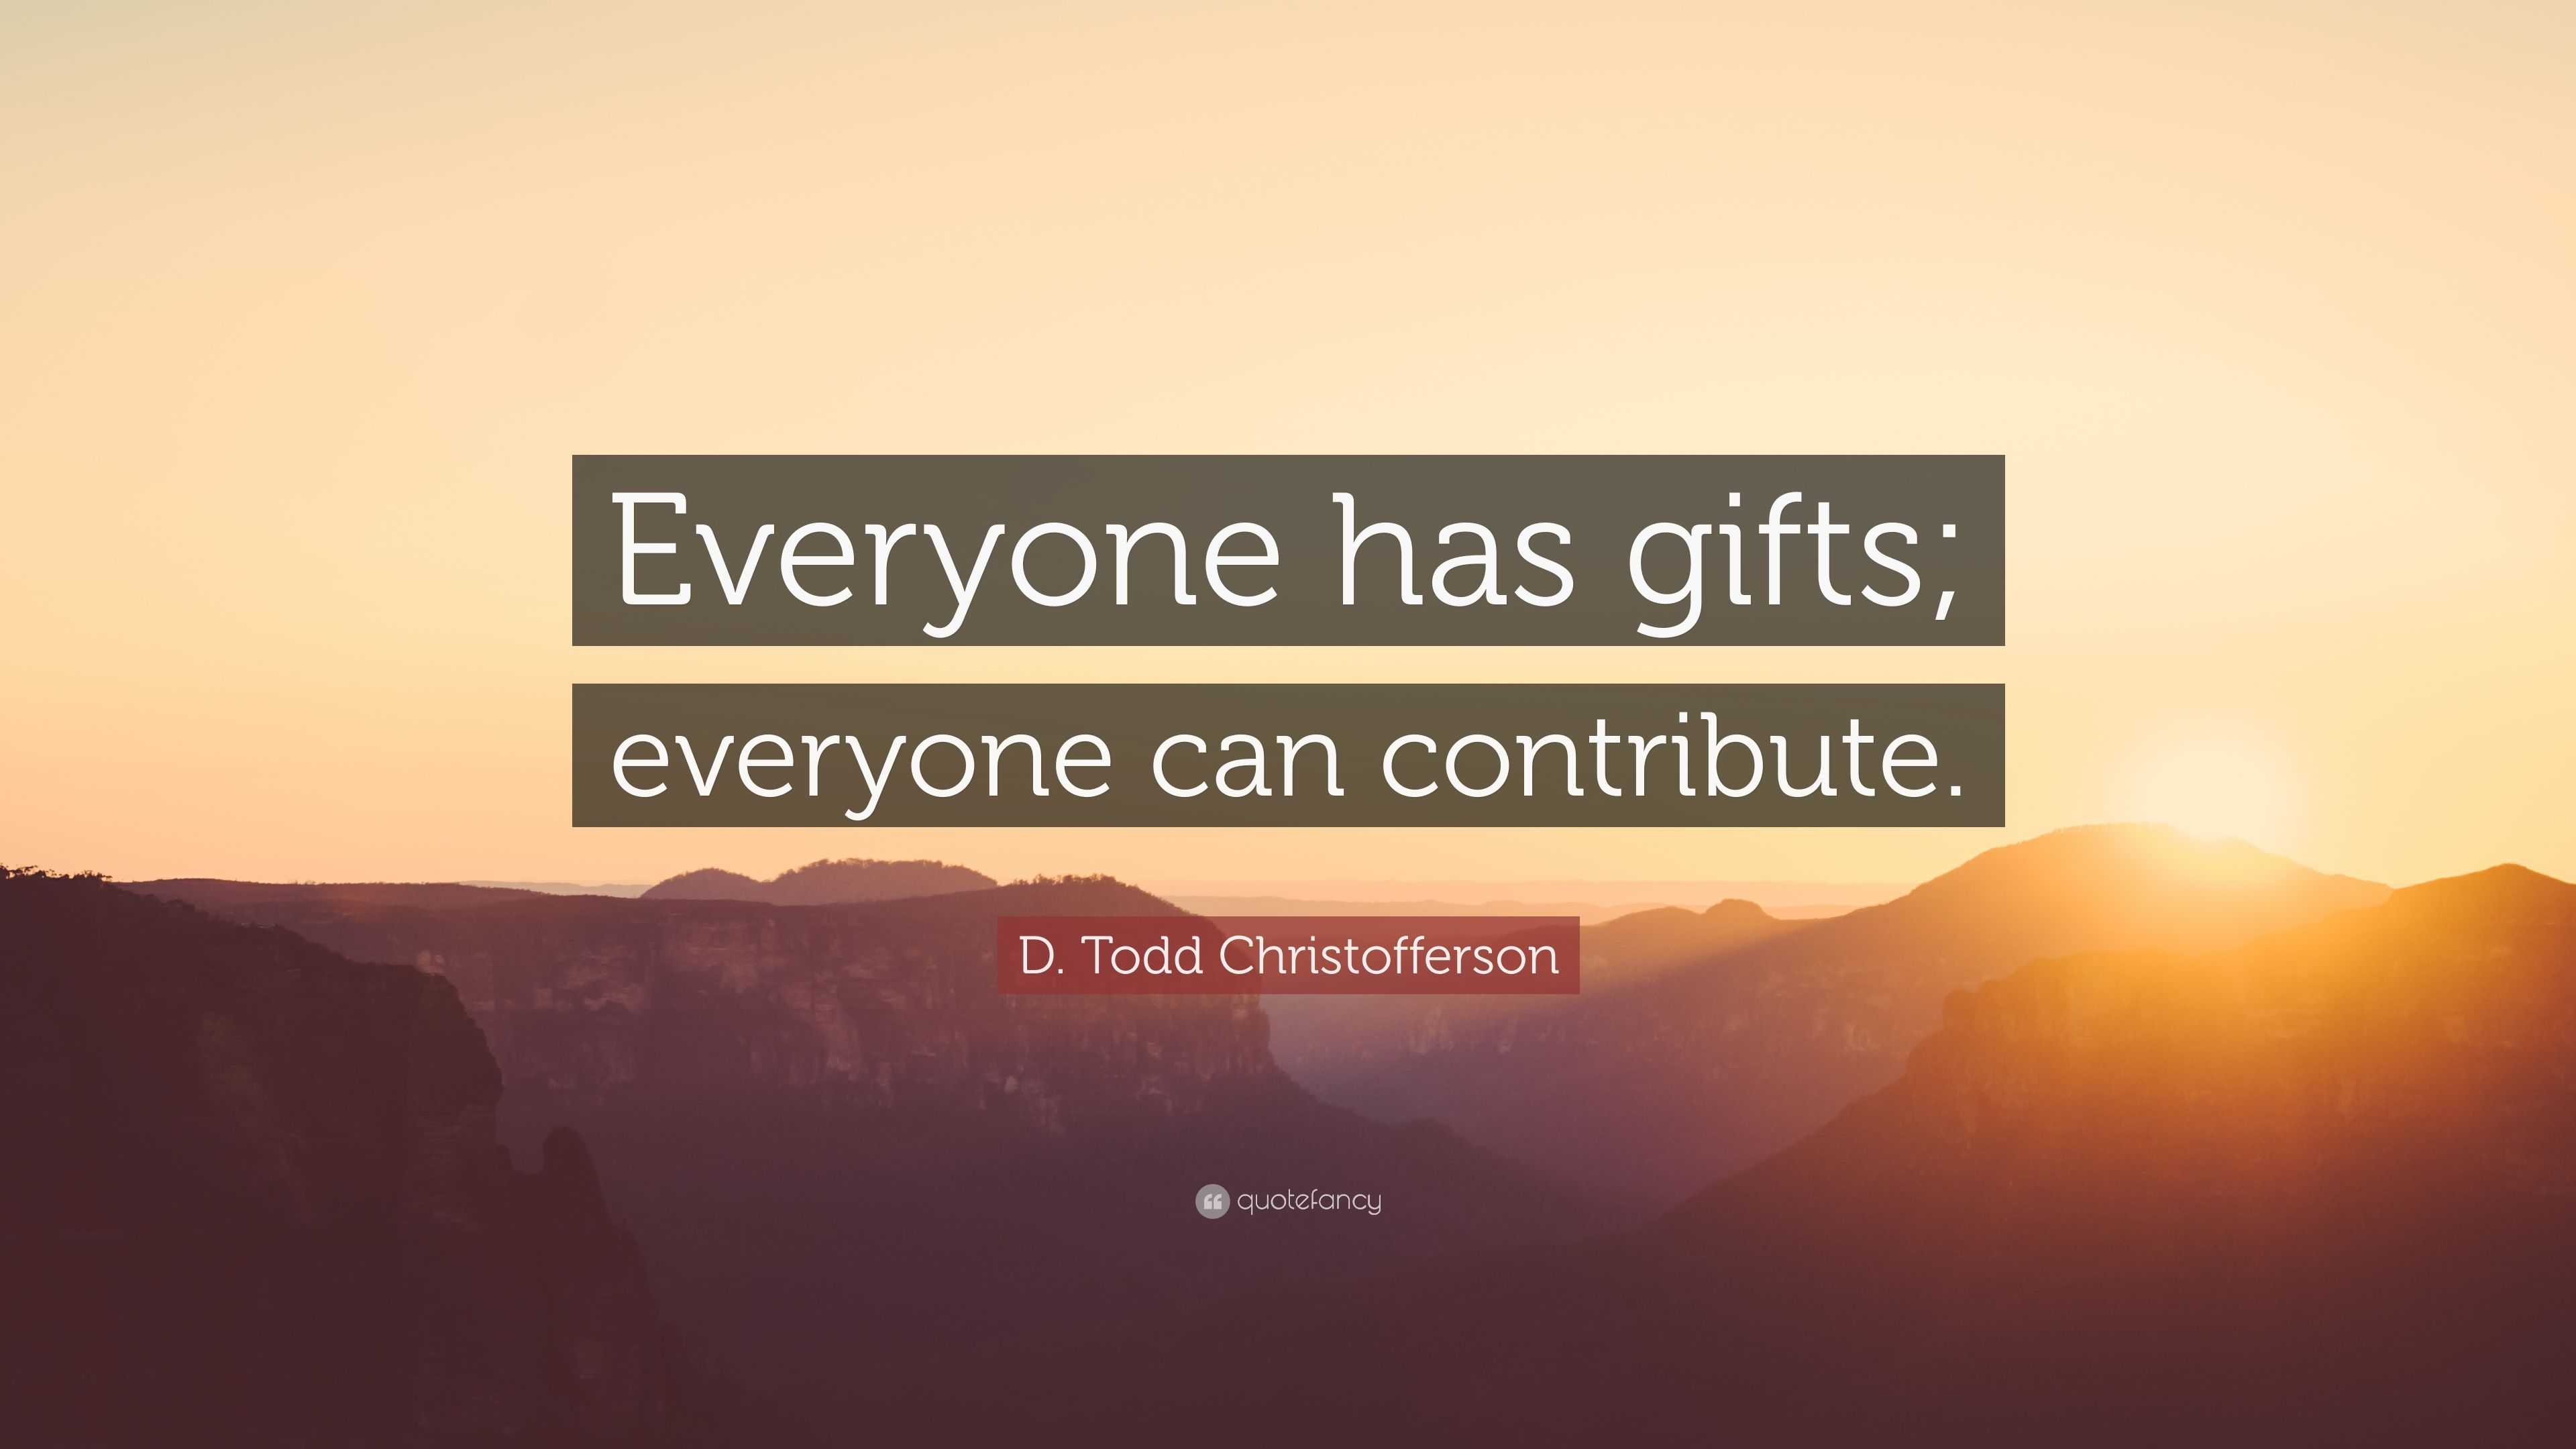 D. Todd Christofferson Quote: “Everyone has gifts; everyone can